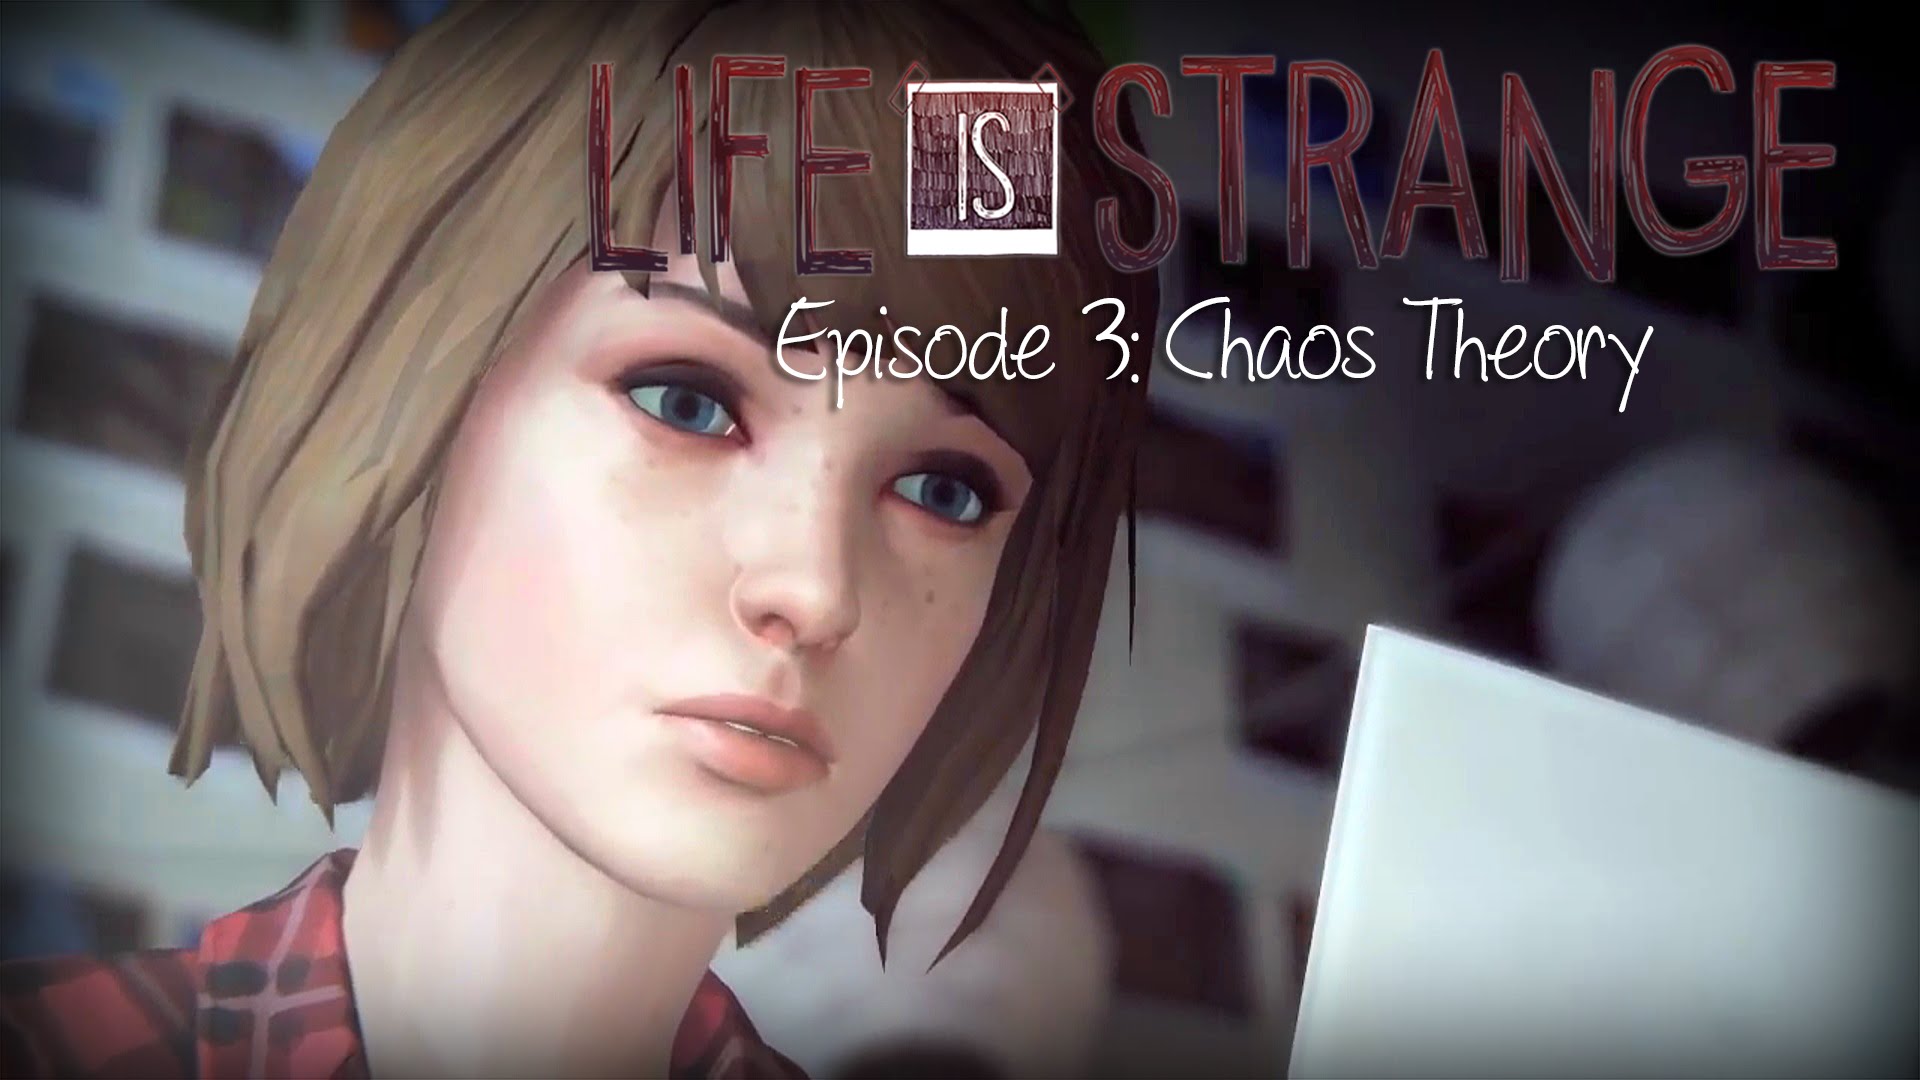 Life is serious. Life is Strange эпизоды. Life is Strange 3. Life is Strange эпизод 4 Проявочная. Life is Strange: Episode 3 - Chaos Theory.